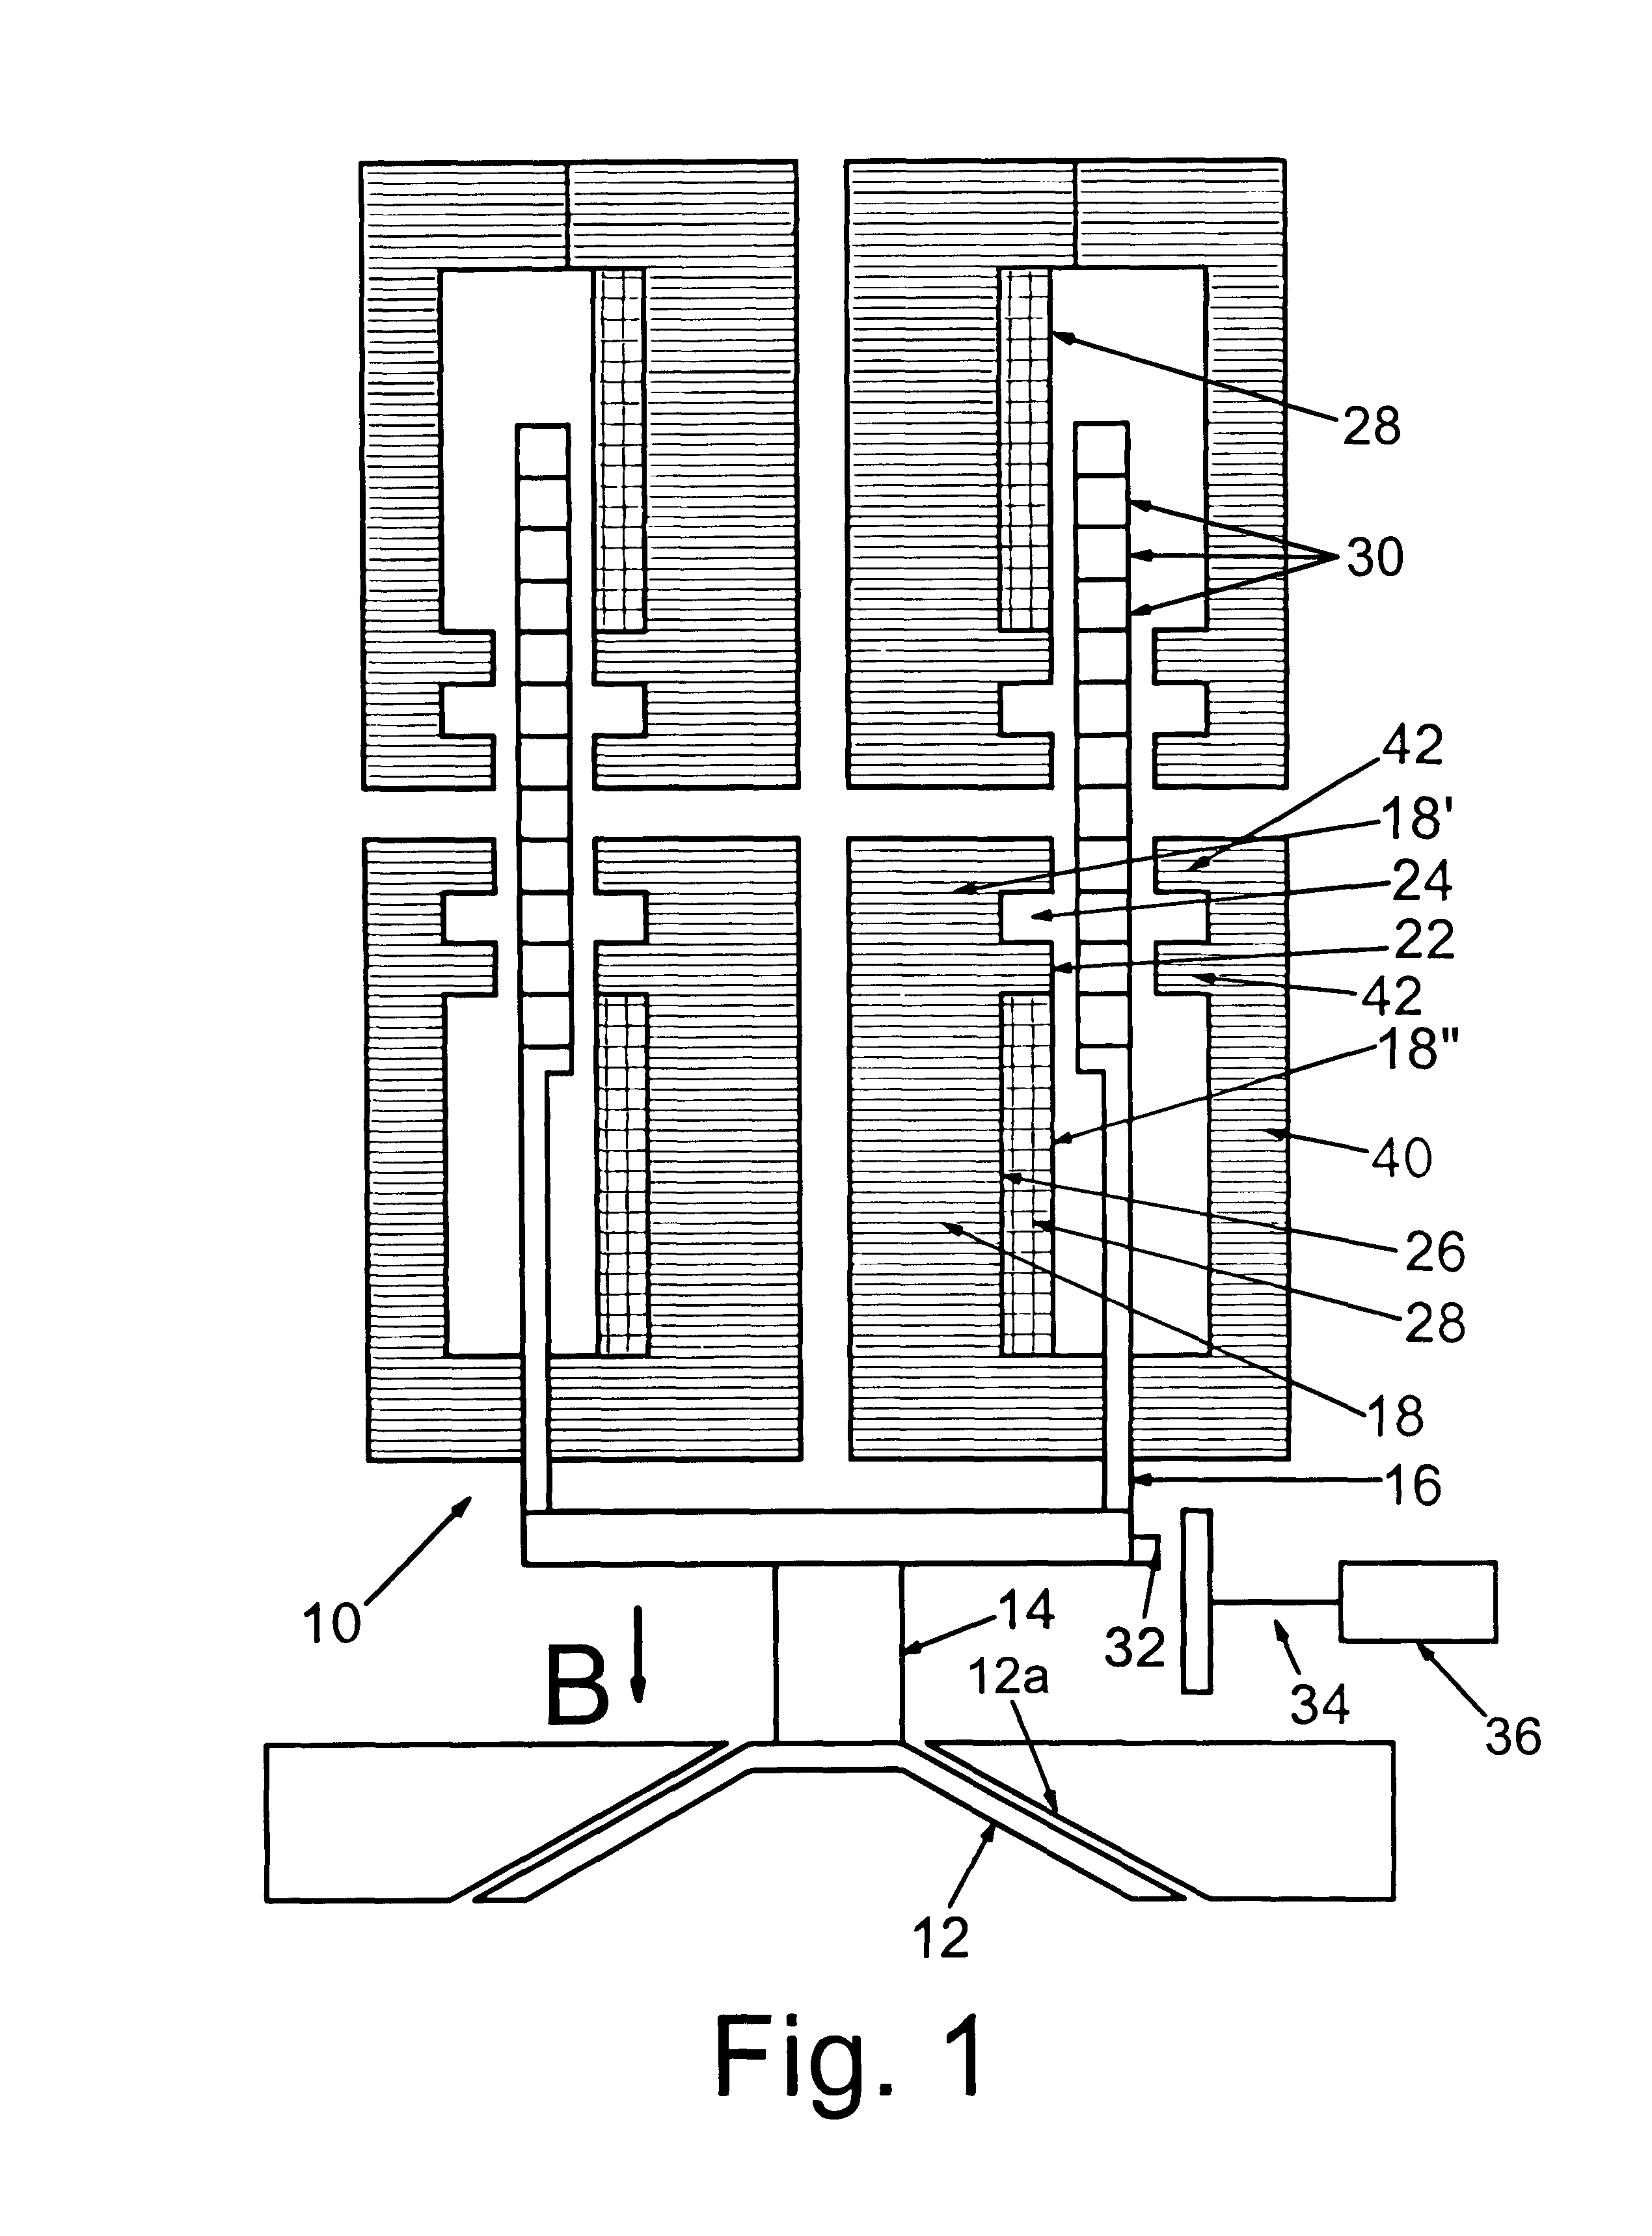 Gas exchange valve drive for a valve-controlled combustion engine